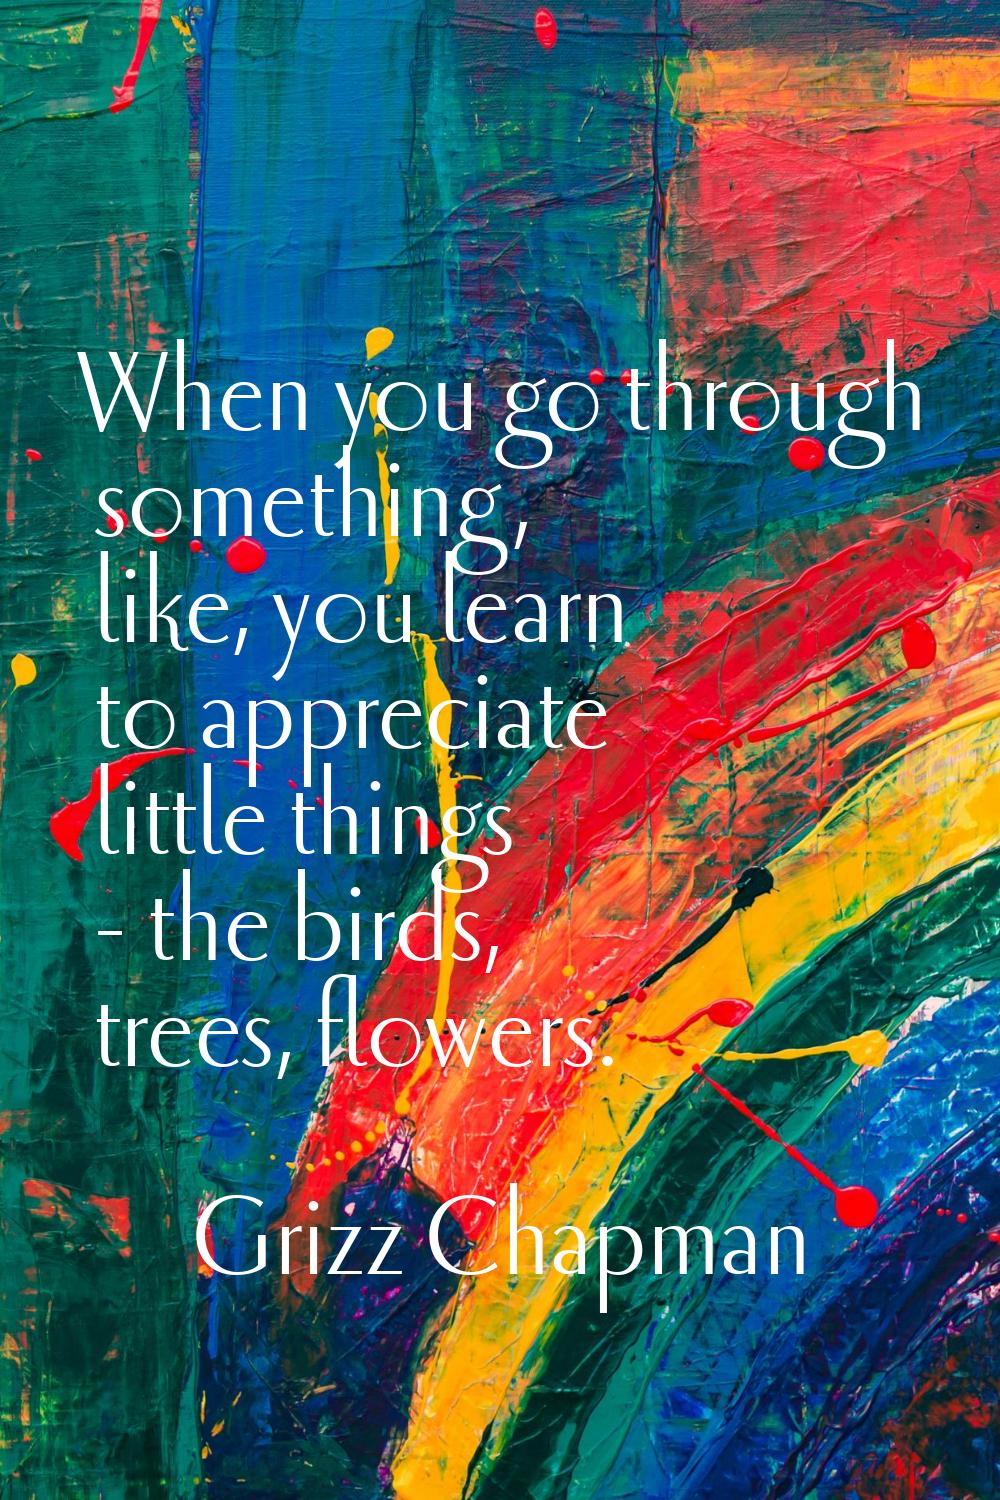 When you go through something, like, you learn to appreciate little things - the birds, trees, flow